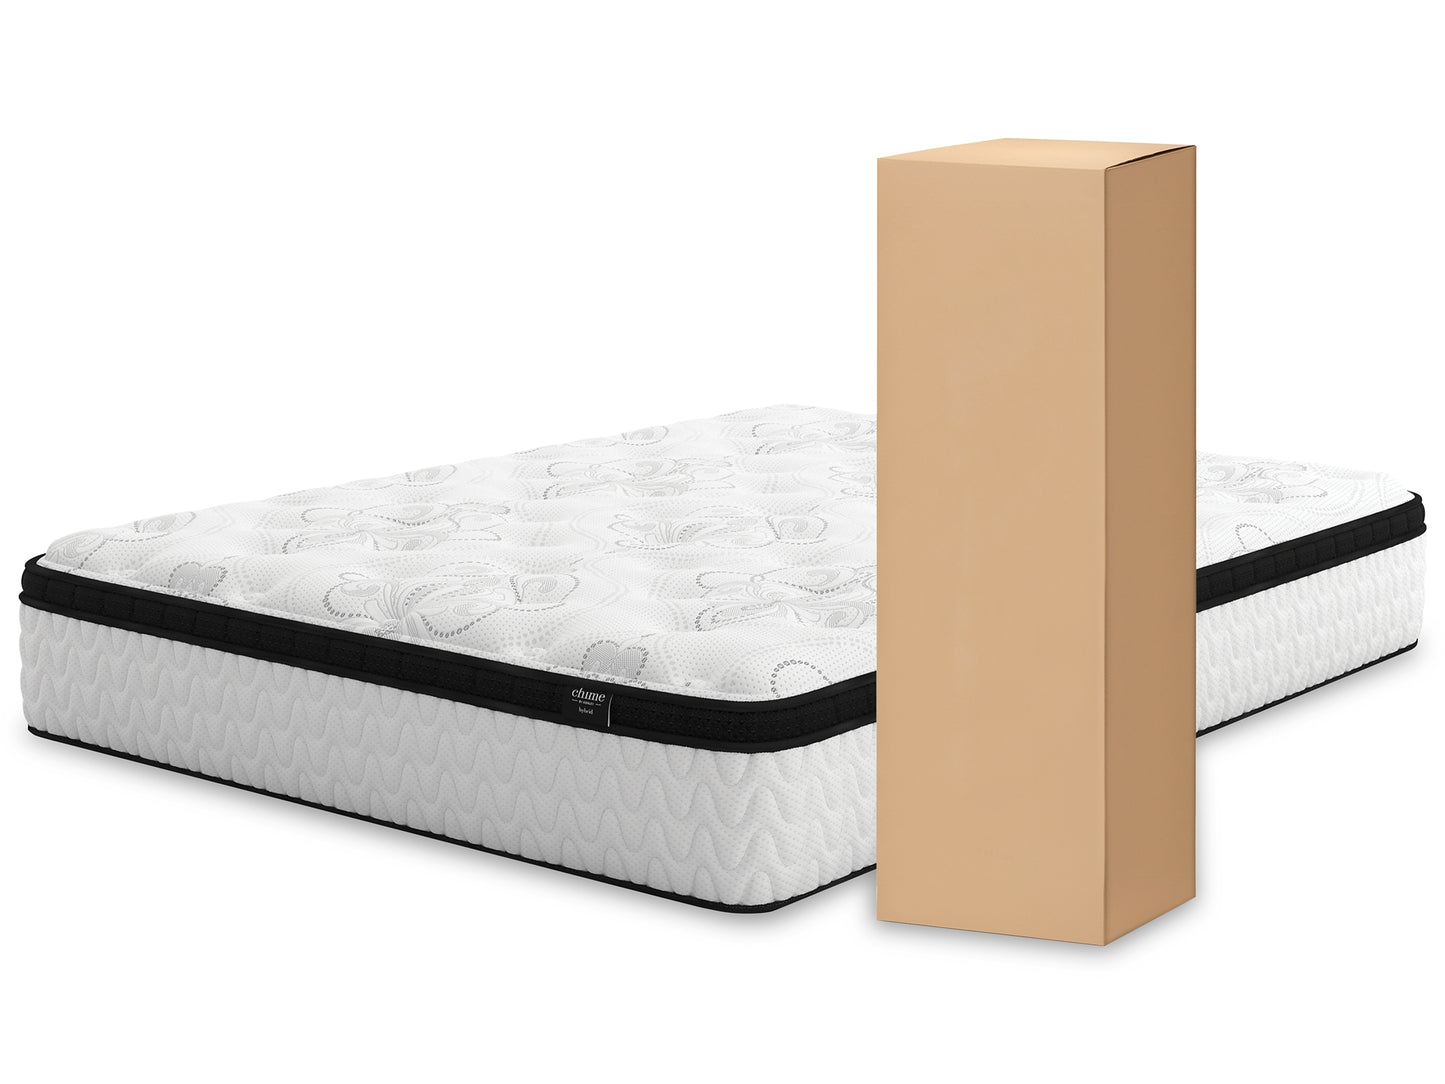 Bellaby Queen Panel Bed with Mattress Sierra Sleep® by Ashley